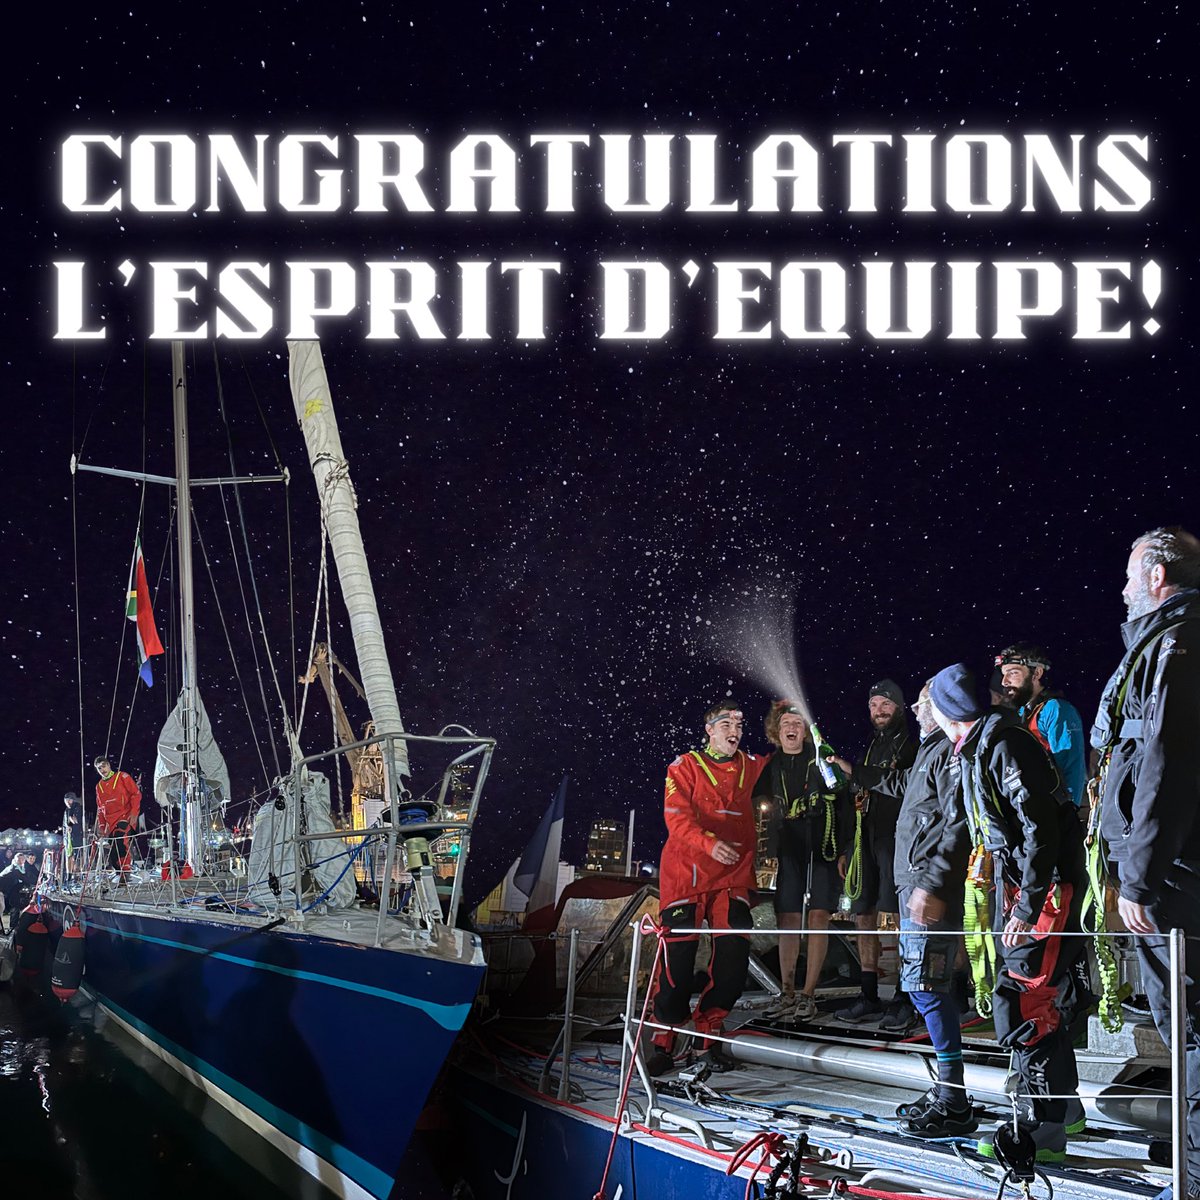 Well done to all of the L’Esprit d’Equipe crew from everyone at The Maiden Factor for crossing the final @oceangloberace finish line after 39 days at sea! 👏 #OGR2023